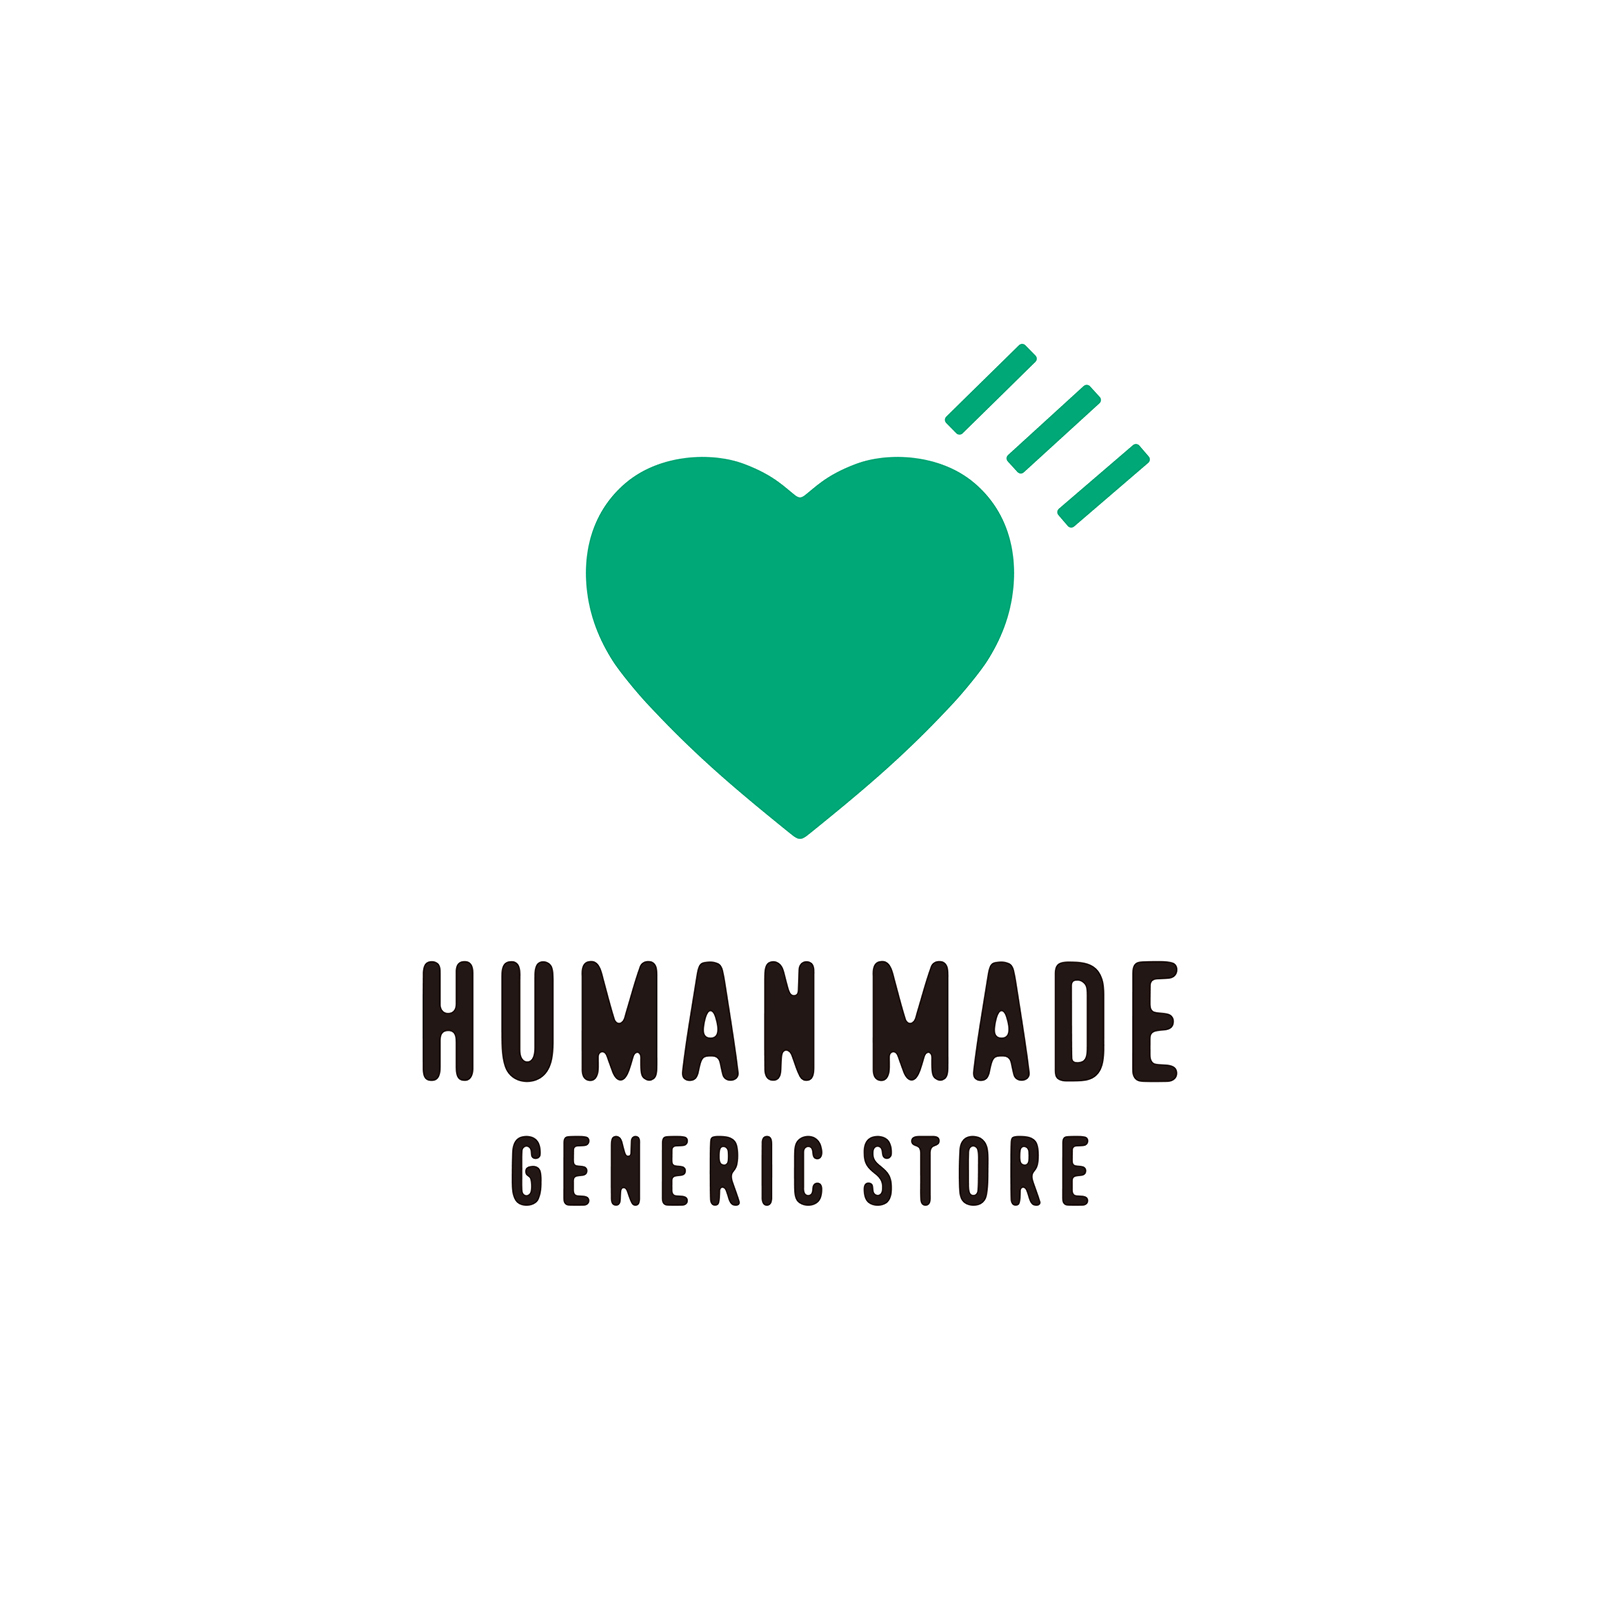 Notice of opening of HUMAN MADE GENERIC STORE